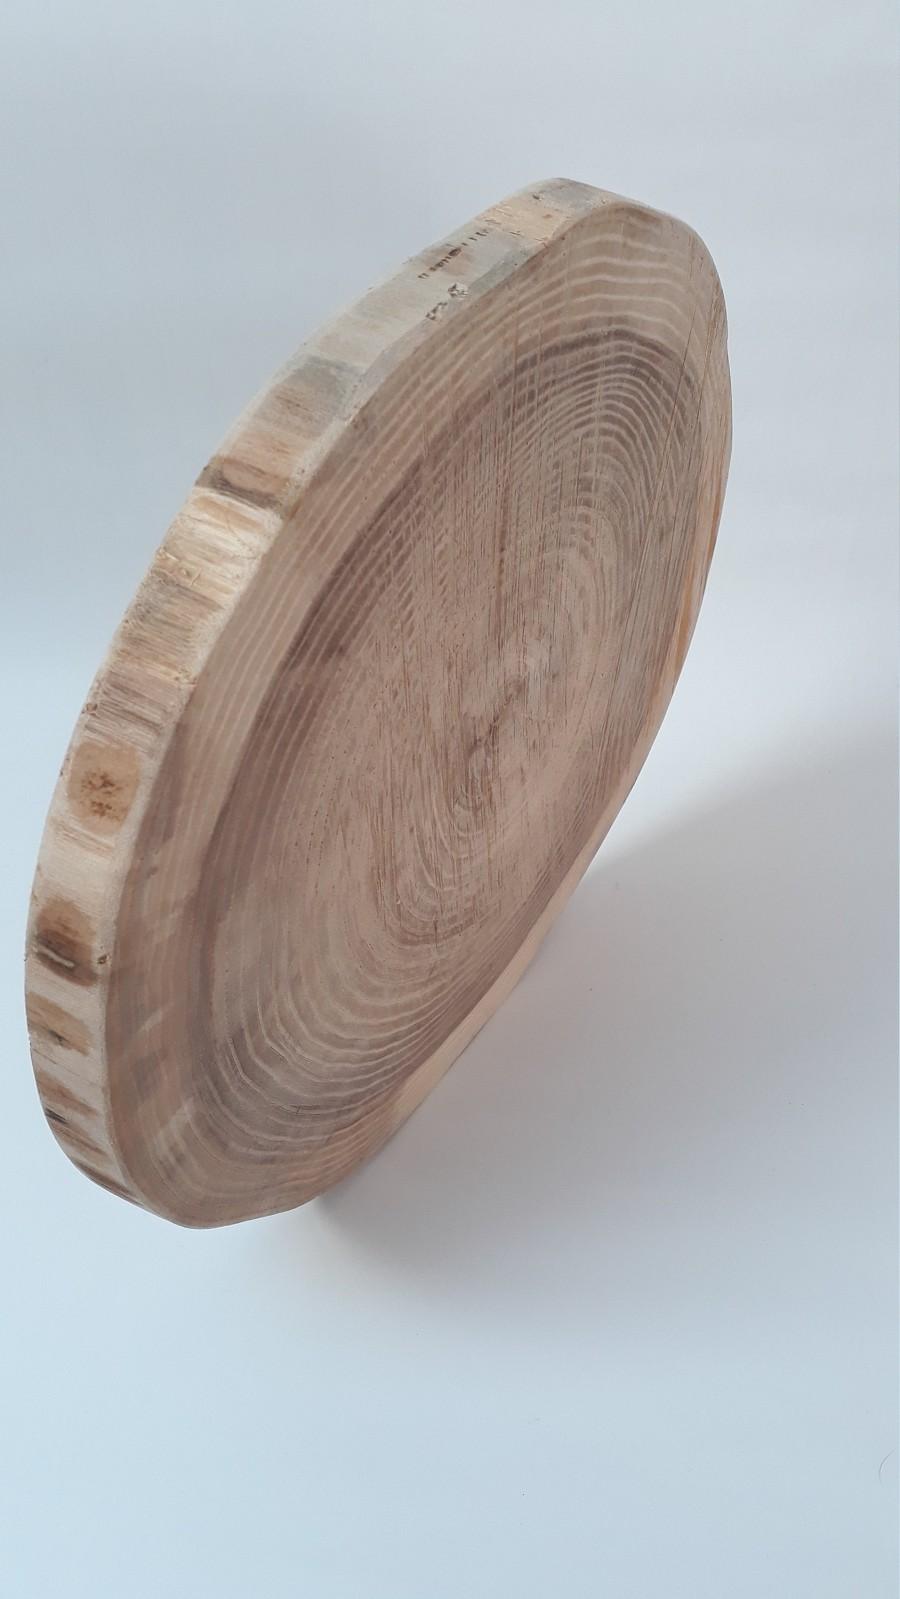 Hochzeit - Large slice of elm wood for decoration and much more